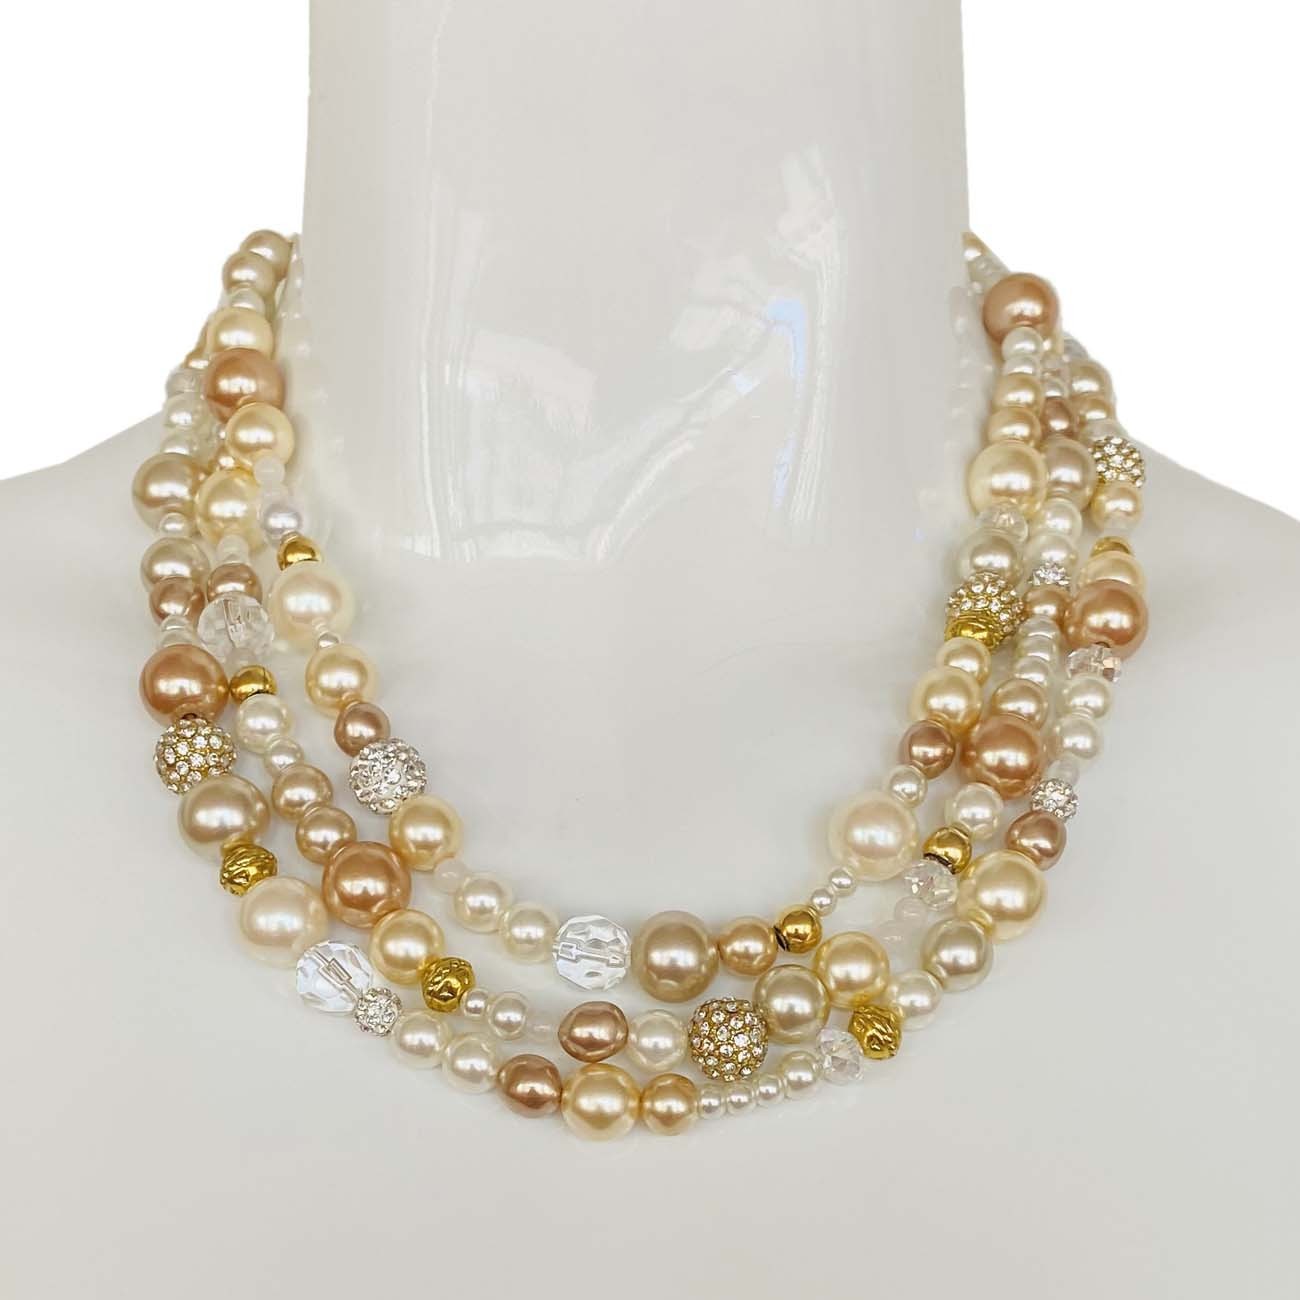 Triple Strand Afternoon Tea Pearl Necklace Jewelry Met Opera Shop